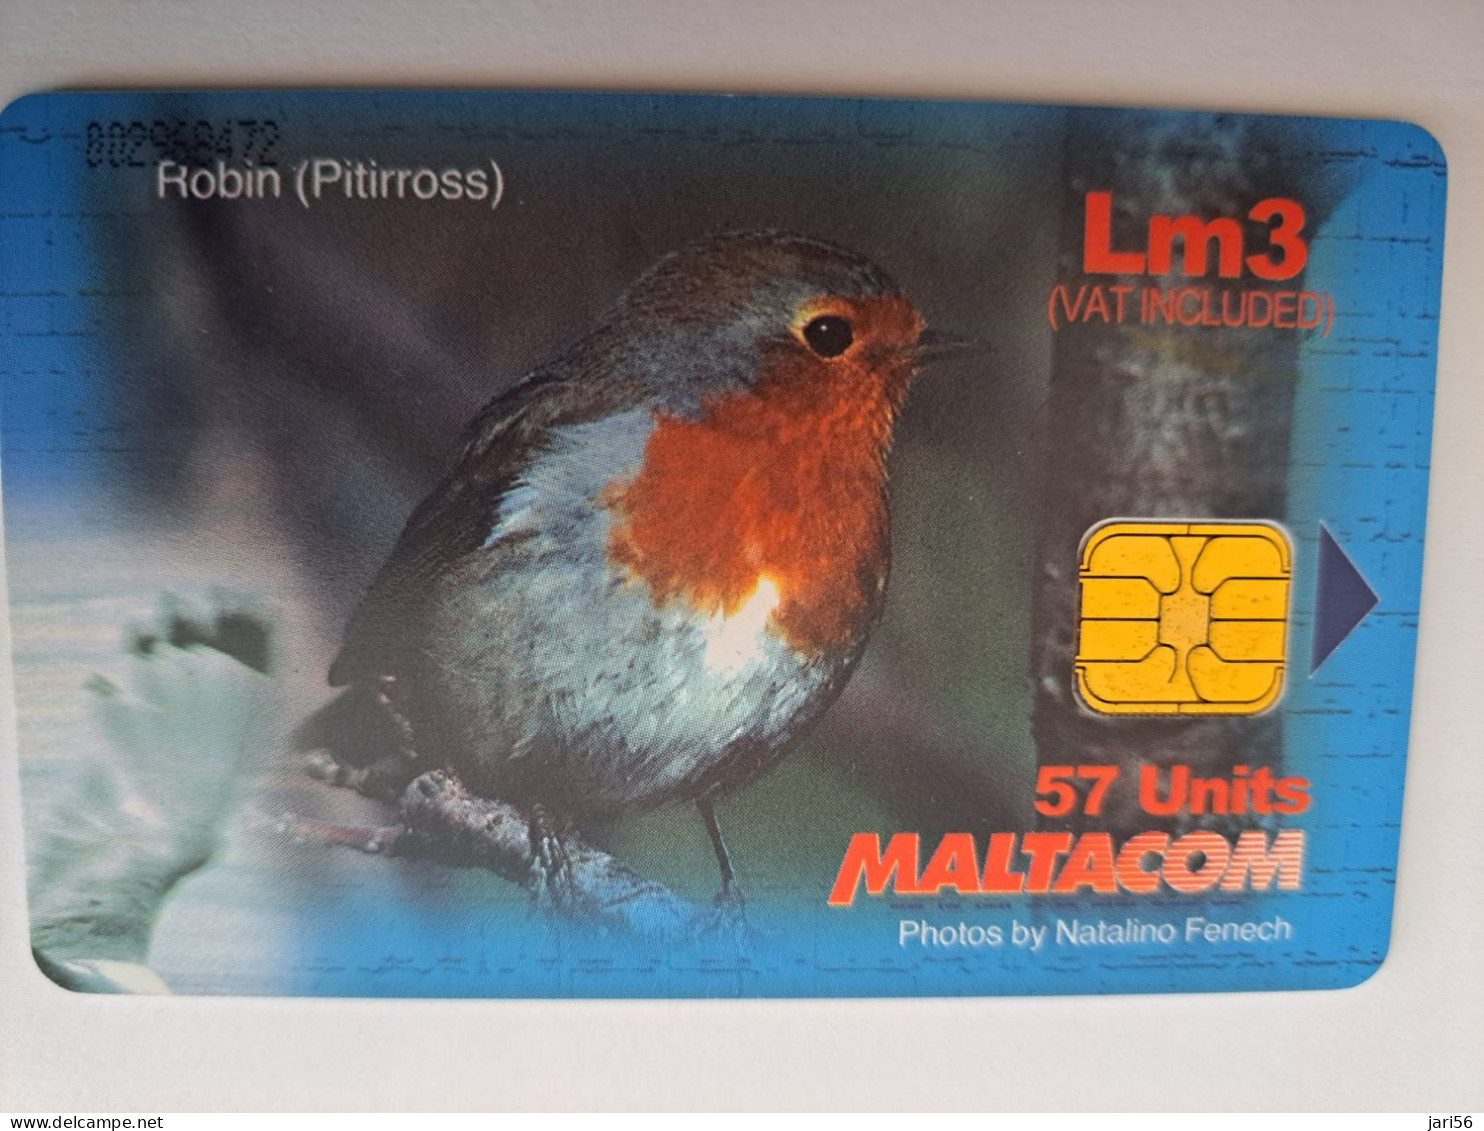 MALTA / SERIE BIRDS / LM2, LM 2, LM 3, LM 5 PUZZLE / BIRDS .4X  CHIPCARD /  /   fine used    ** 15571**